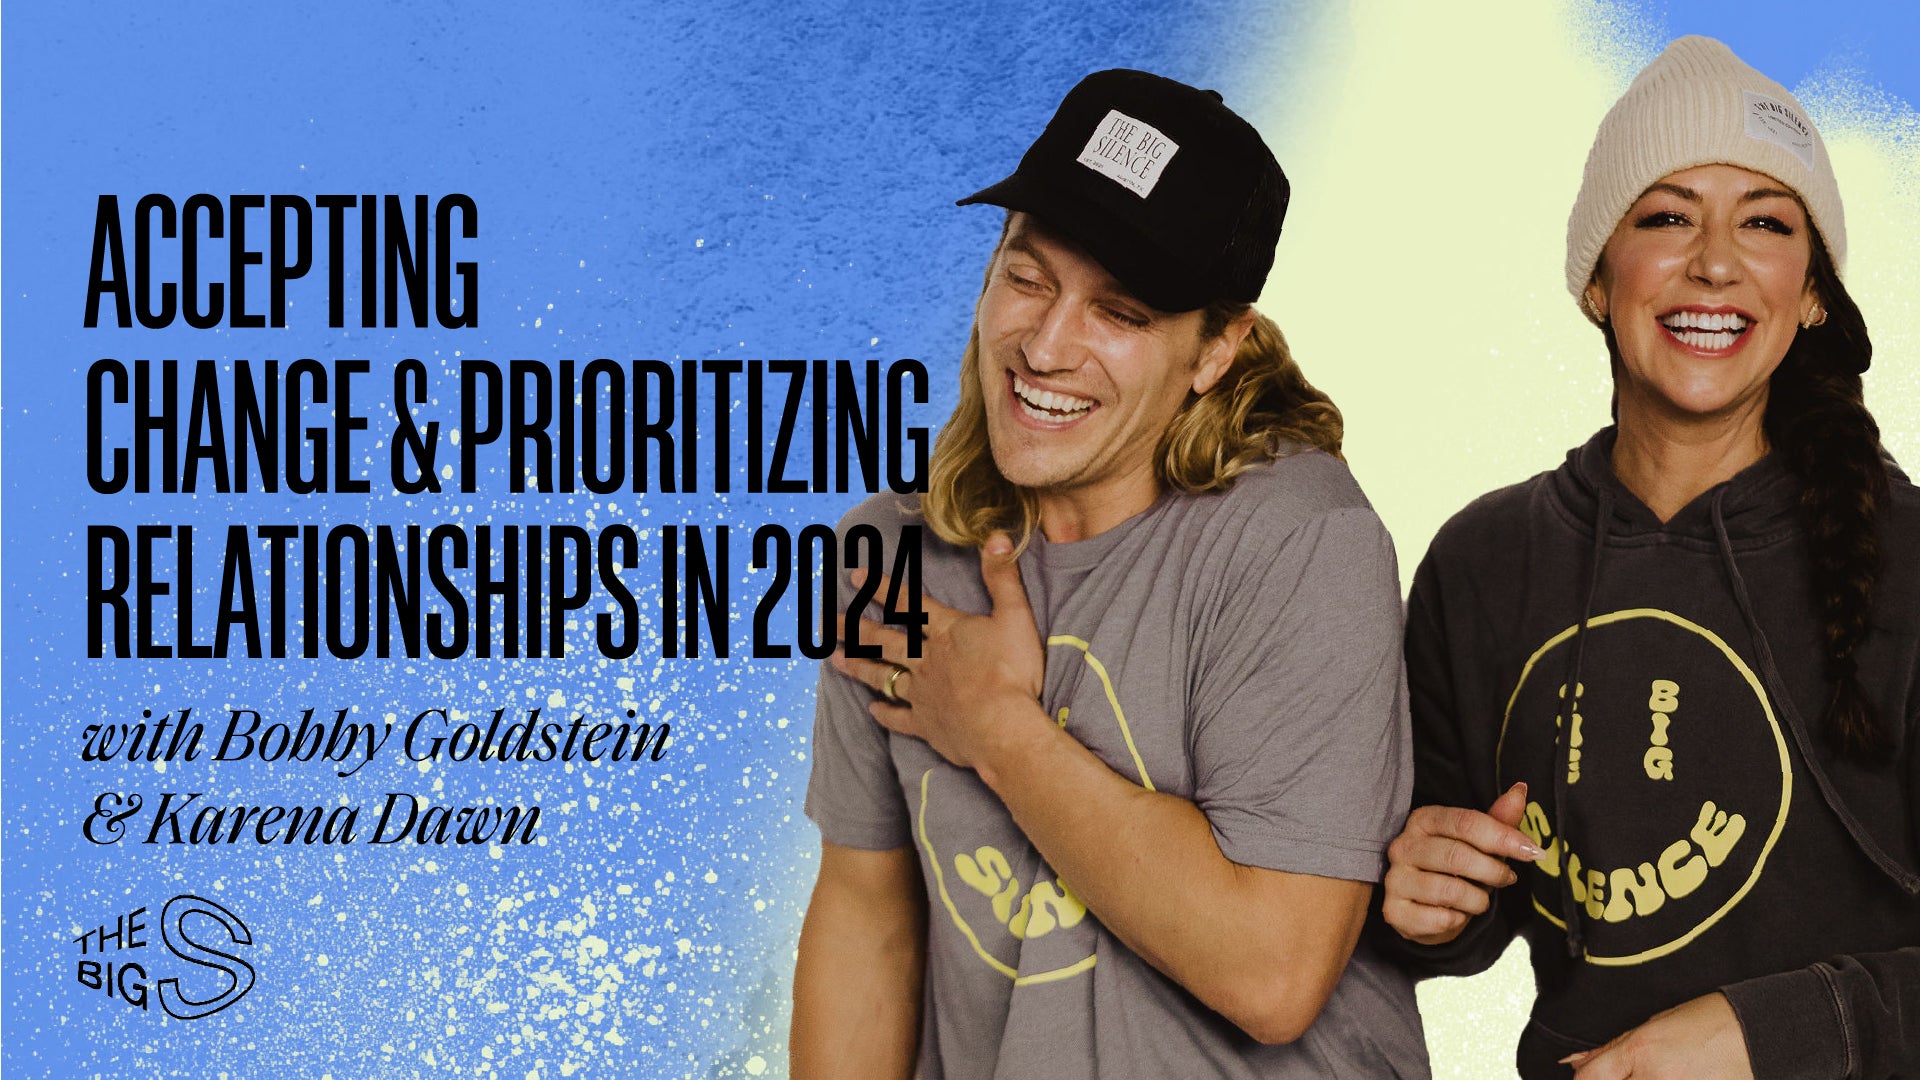 86. ACCEPTING CHANGE & PRIORITIZING RELATIONSHIPS IN 2024 WITH BOBBY GOLDSTEIN & KARENA DAWN